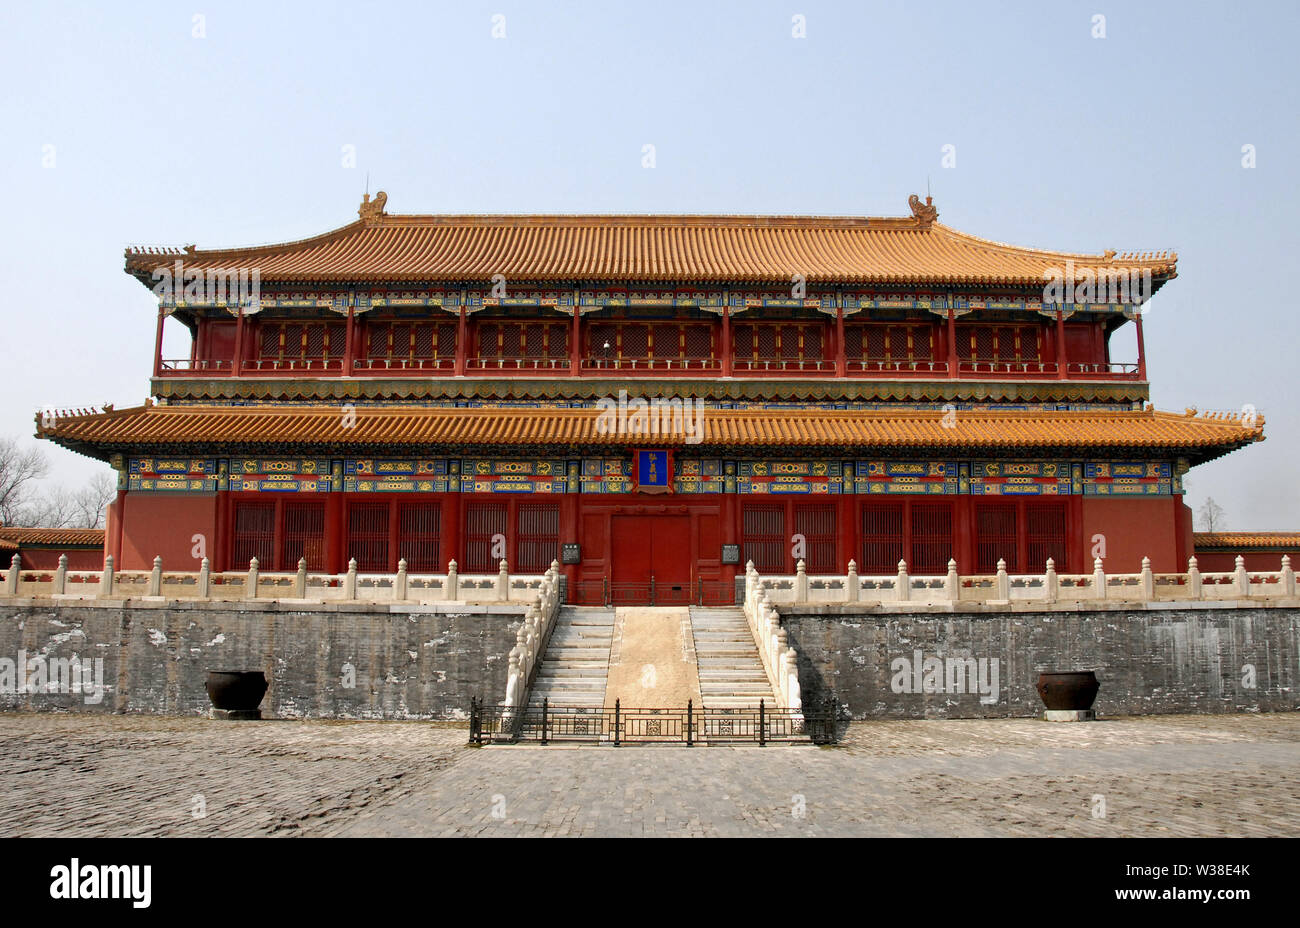 Forbidden City, Beijing, China. Hong Yi Ge: Pavilion of Spreading Righteousness. The Forbidden City has traditional Chinese architecture. UNESCO. Stock Photo